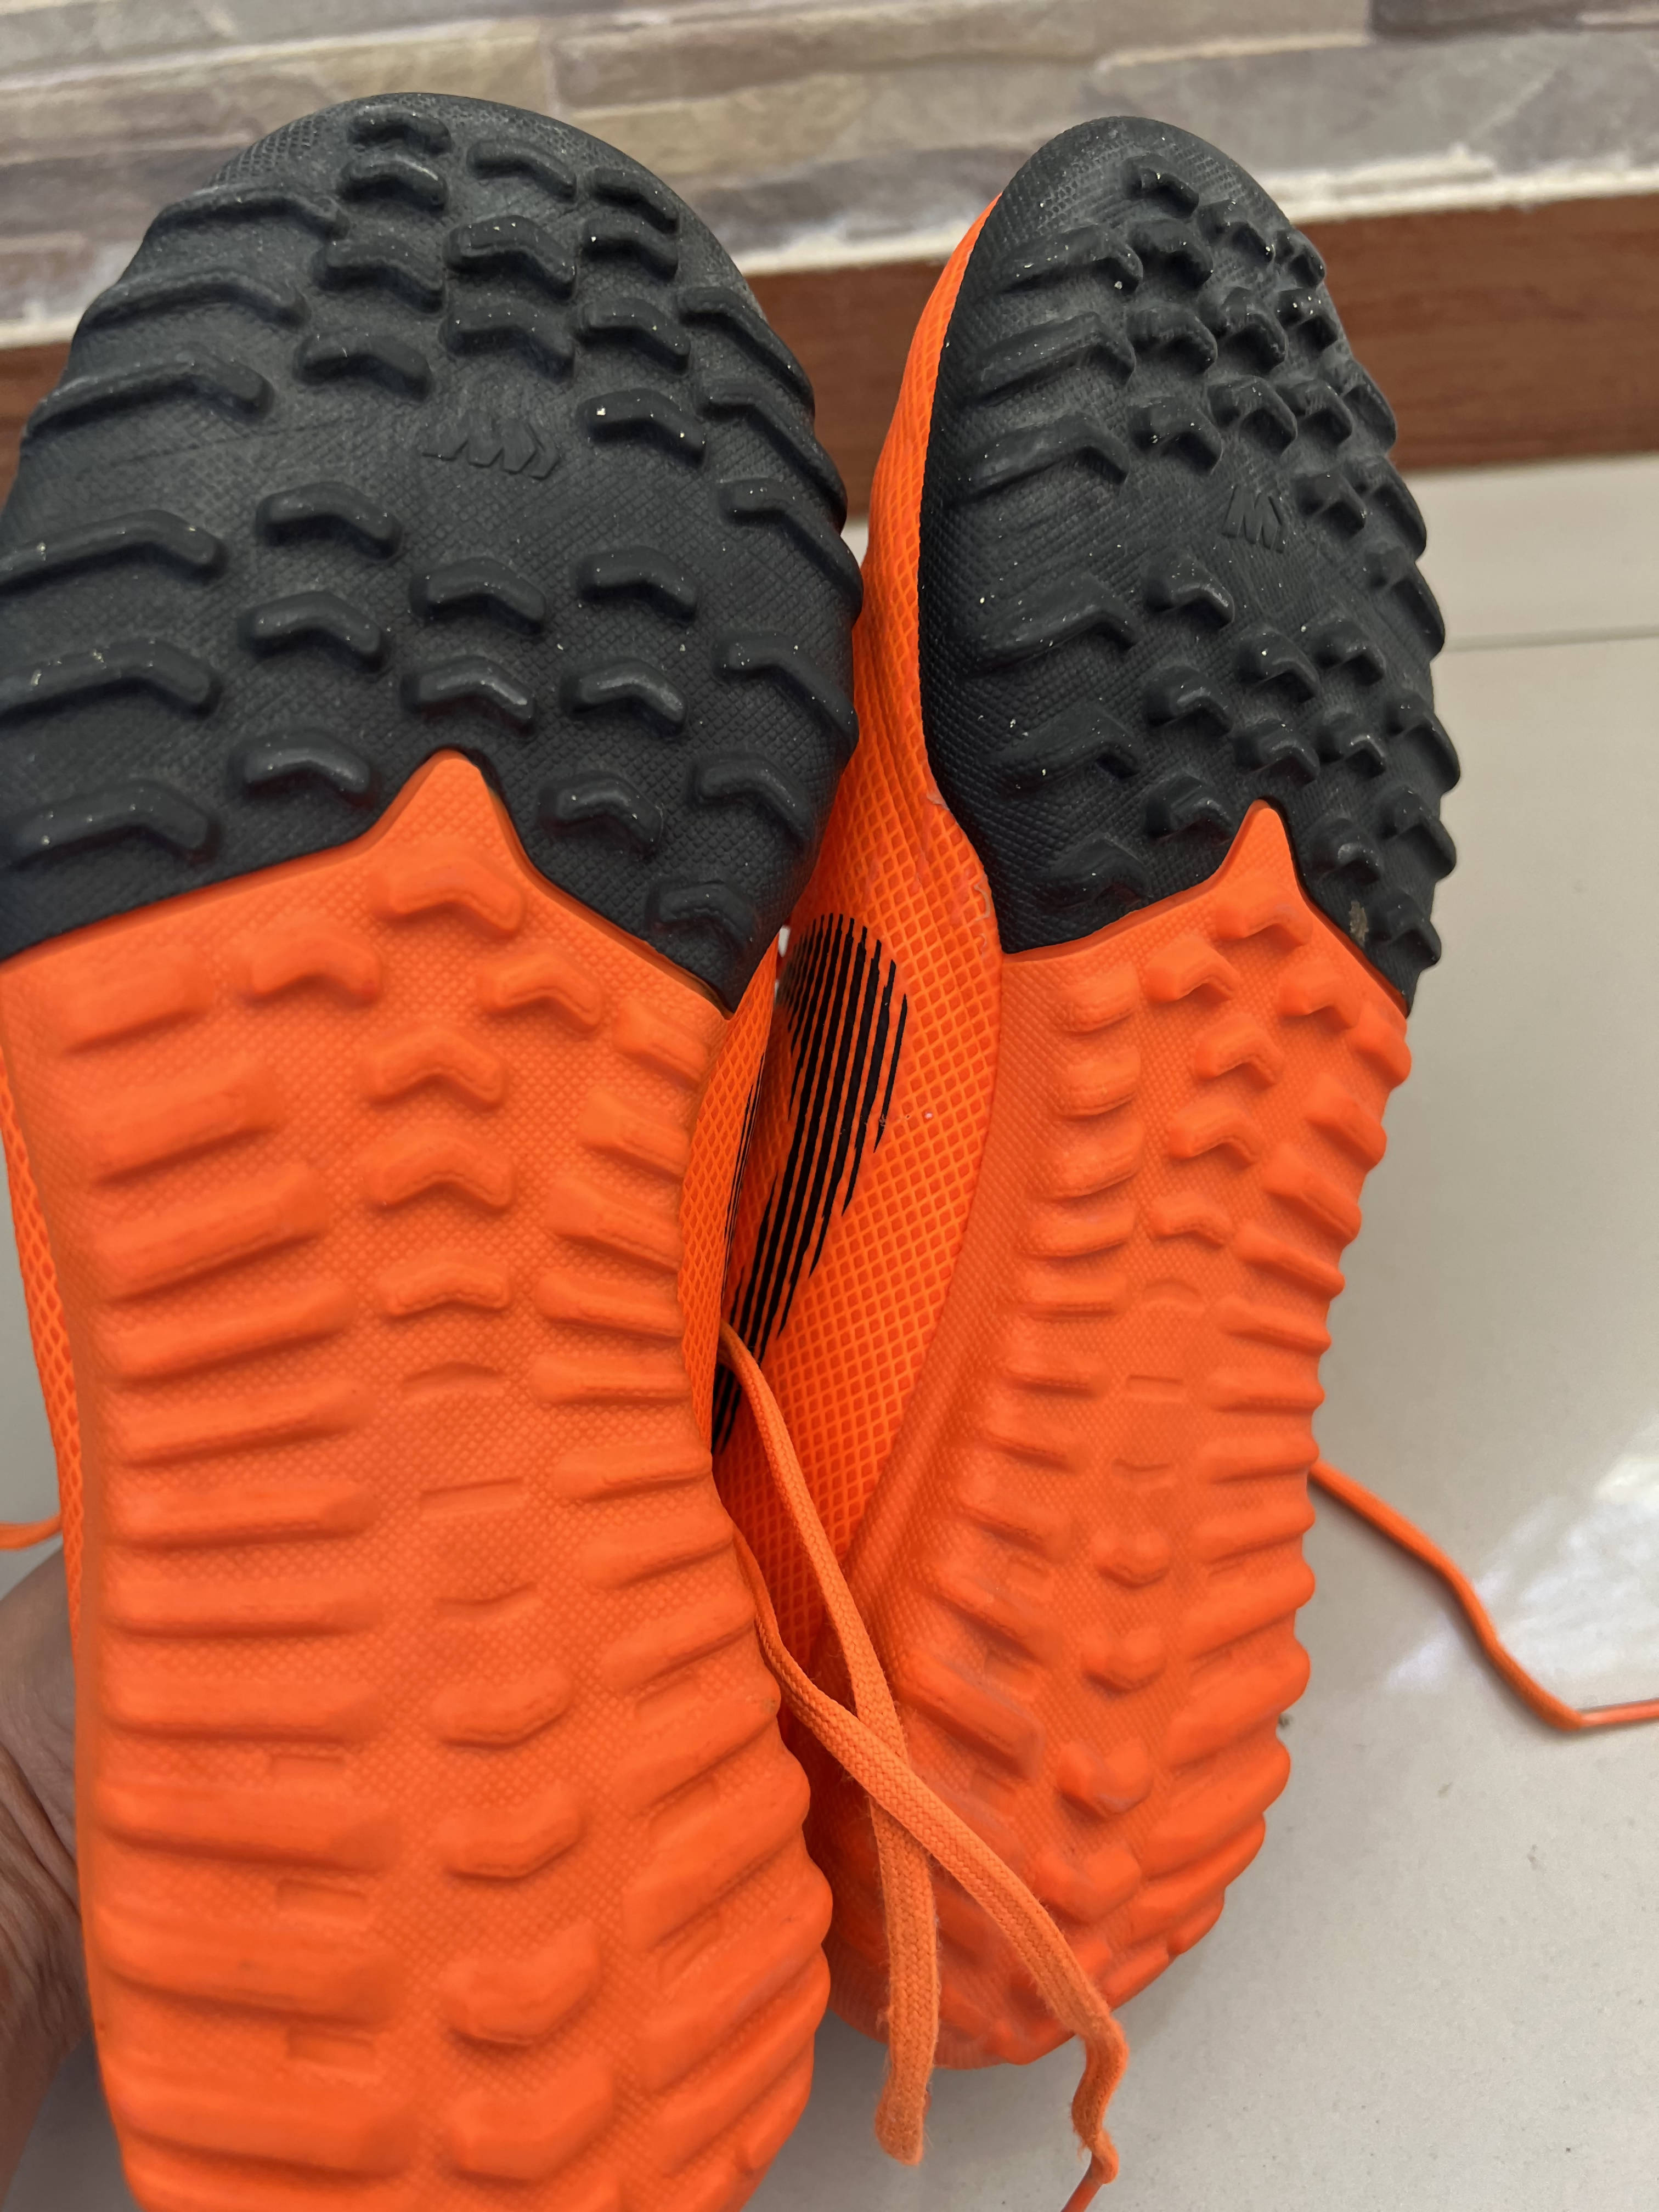 Nike | Orange grippers shoes | Men Shoes | New